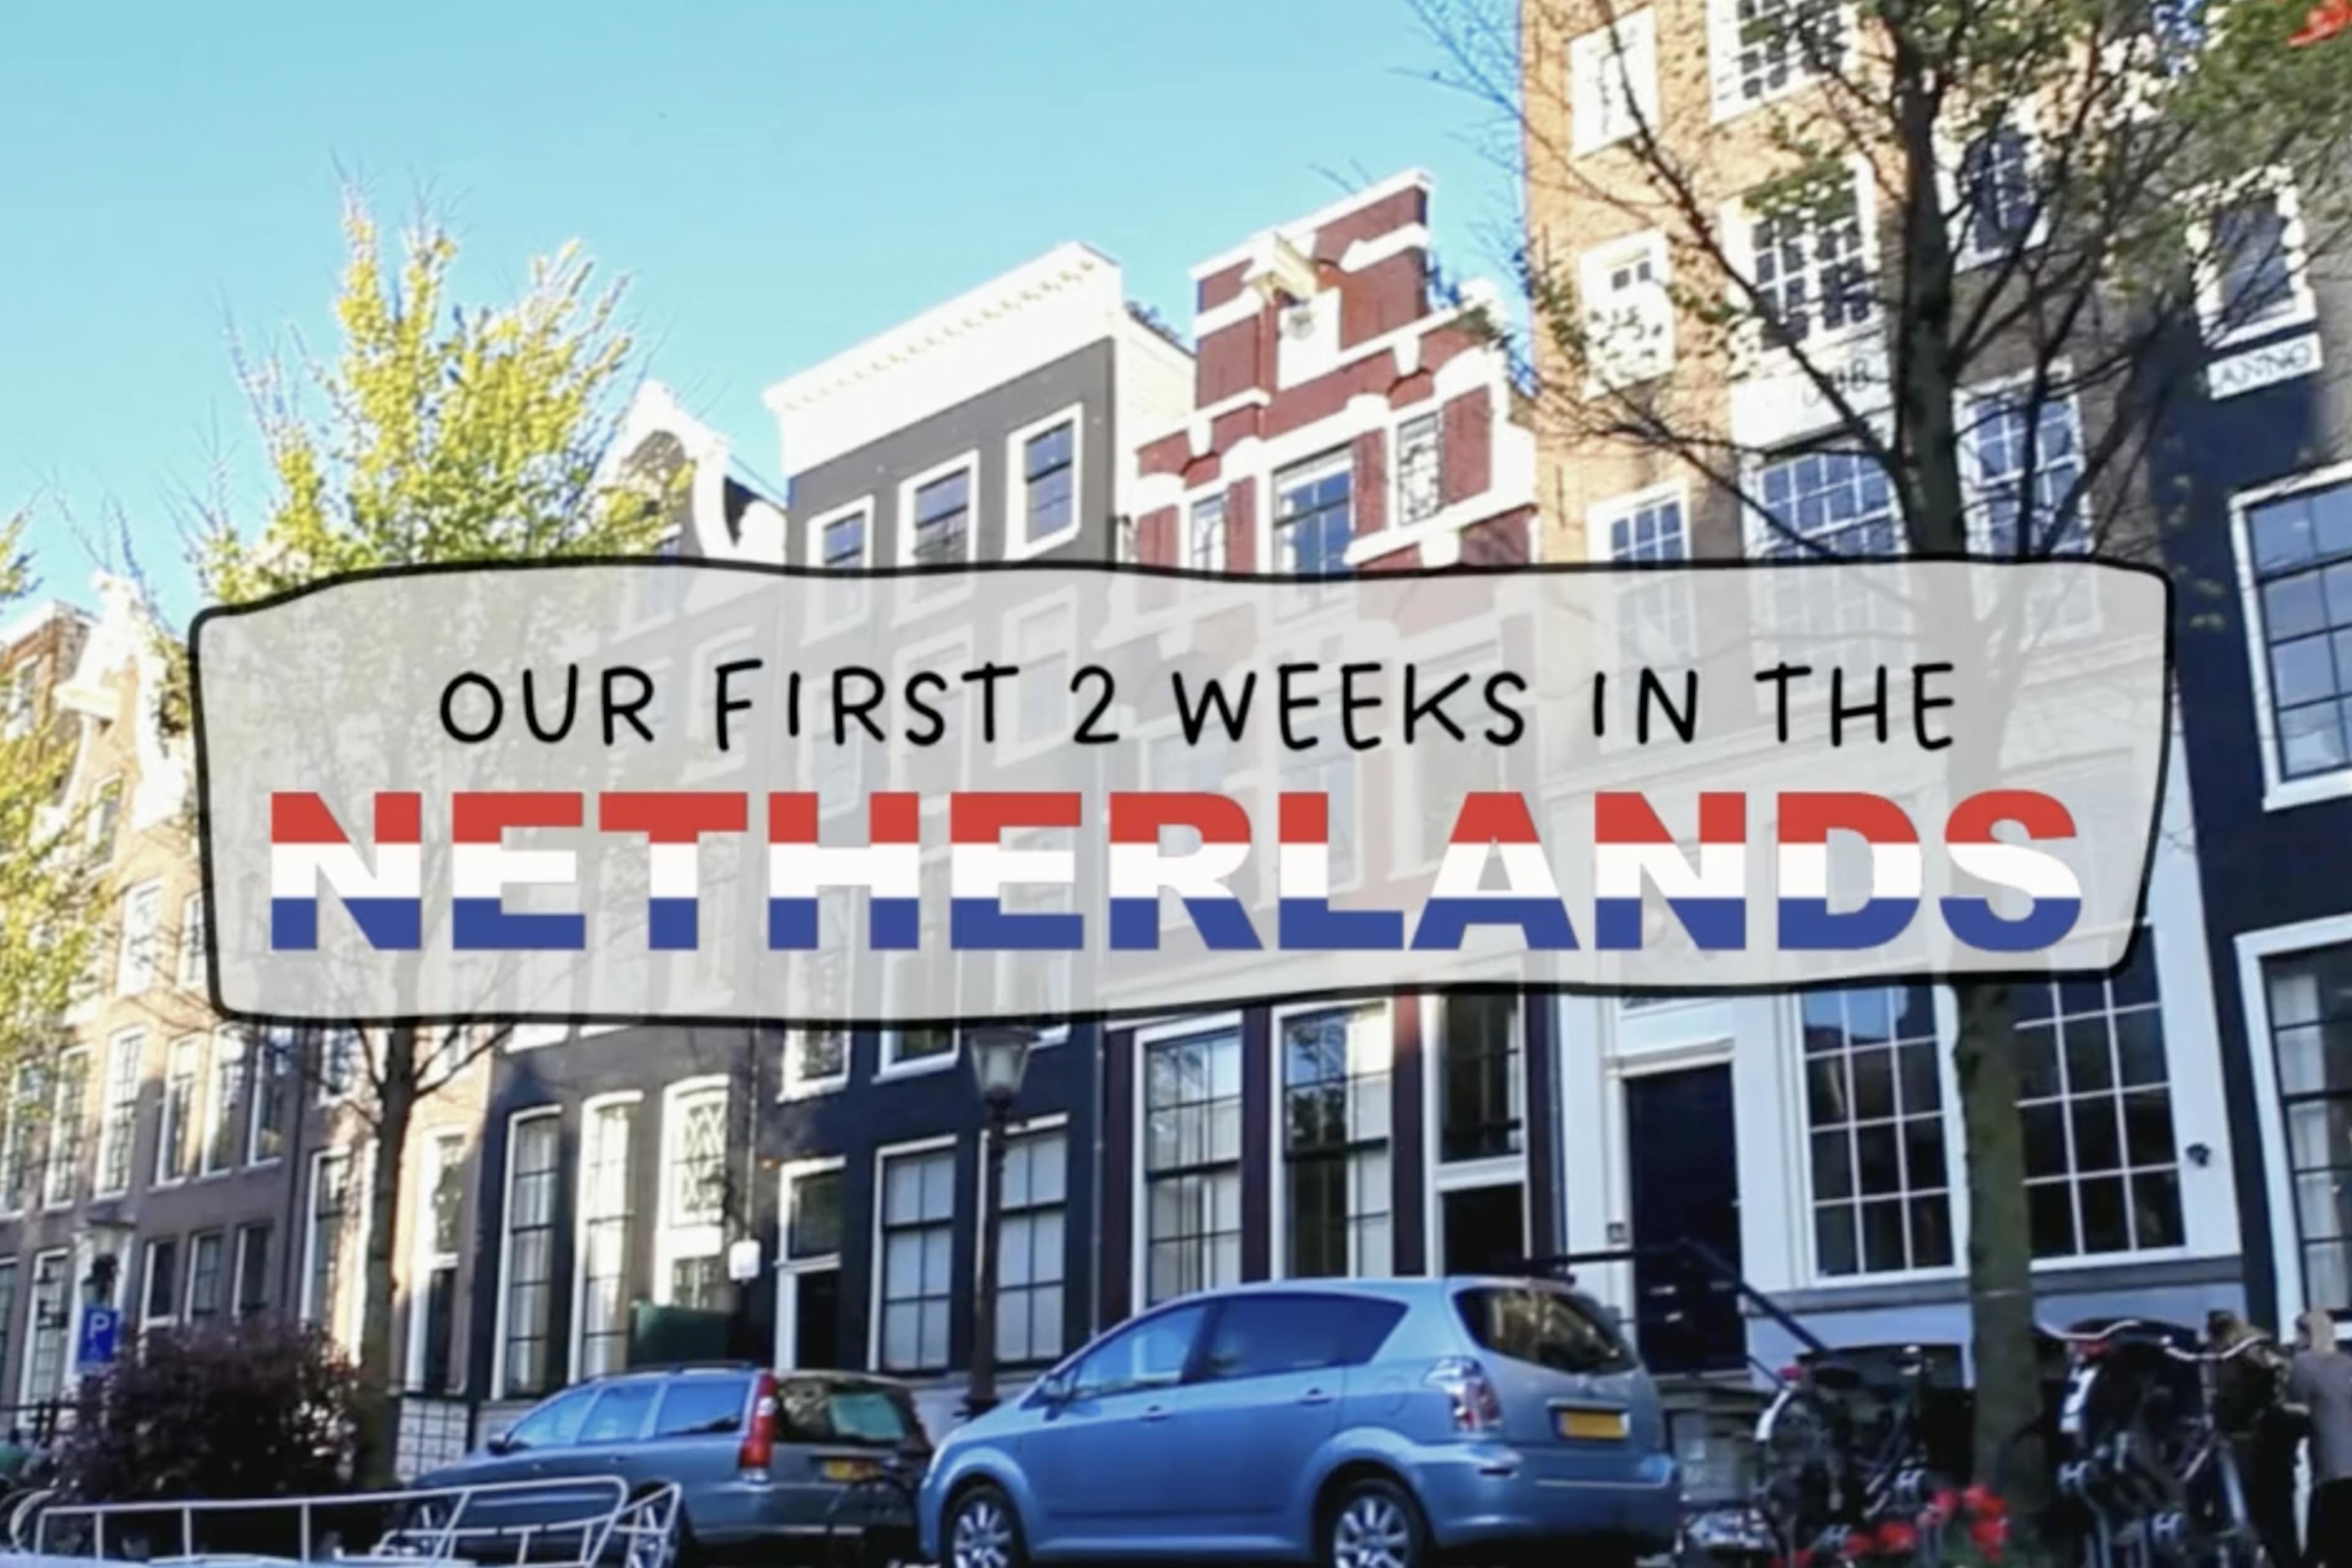 Our First 2 Weeks in The Netherlands